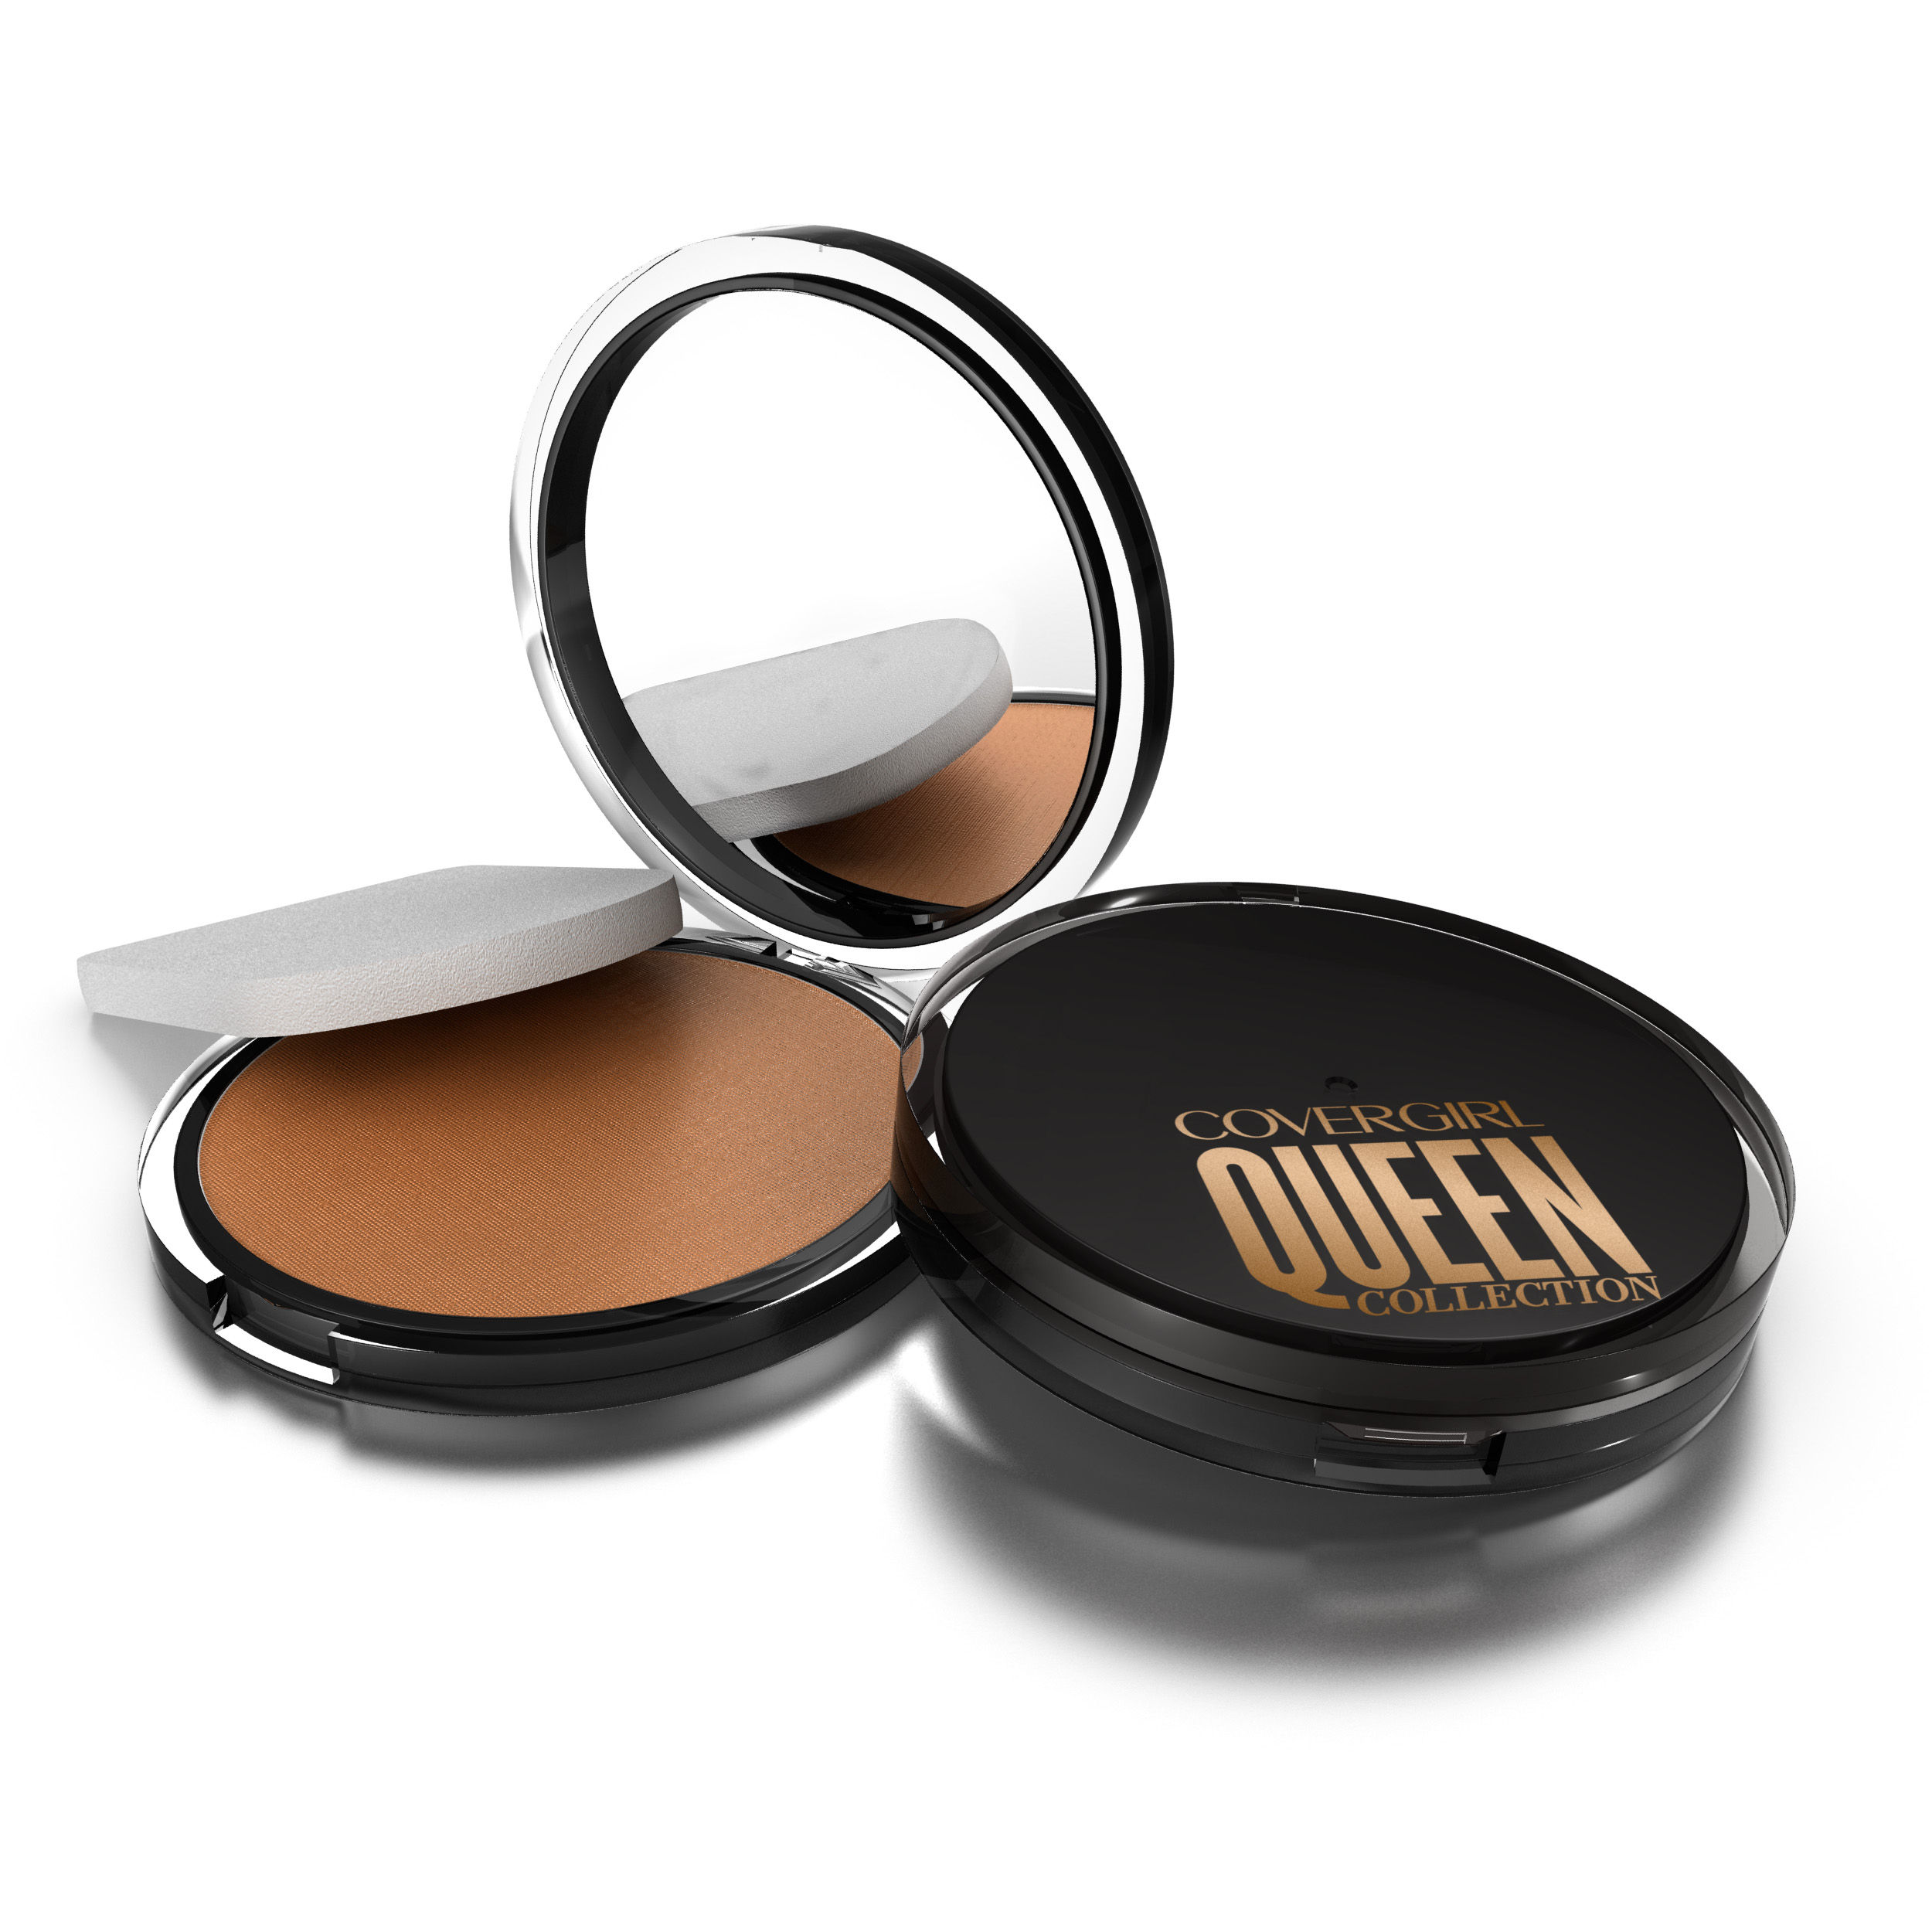 COVERGIRL Queen Lasting Matte Pressed Powder Foundation, Golden - image 3 of 8